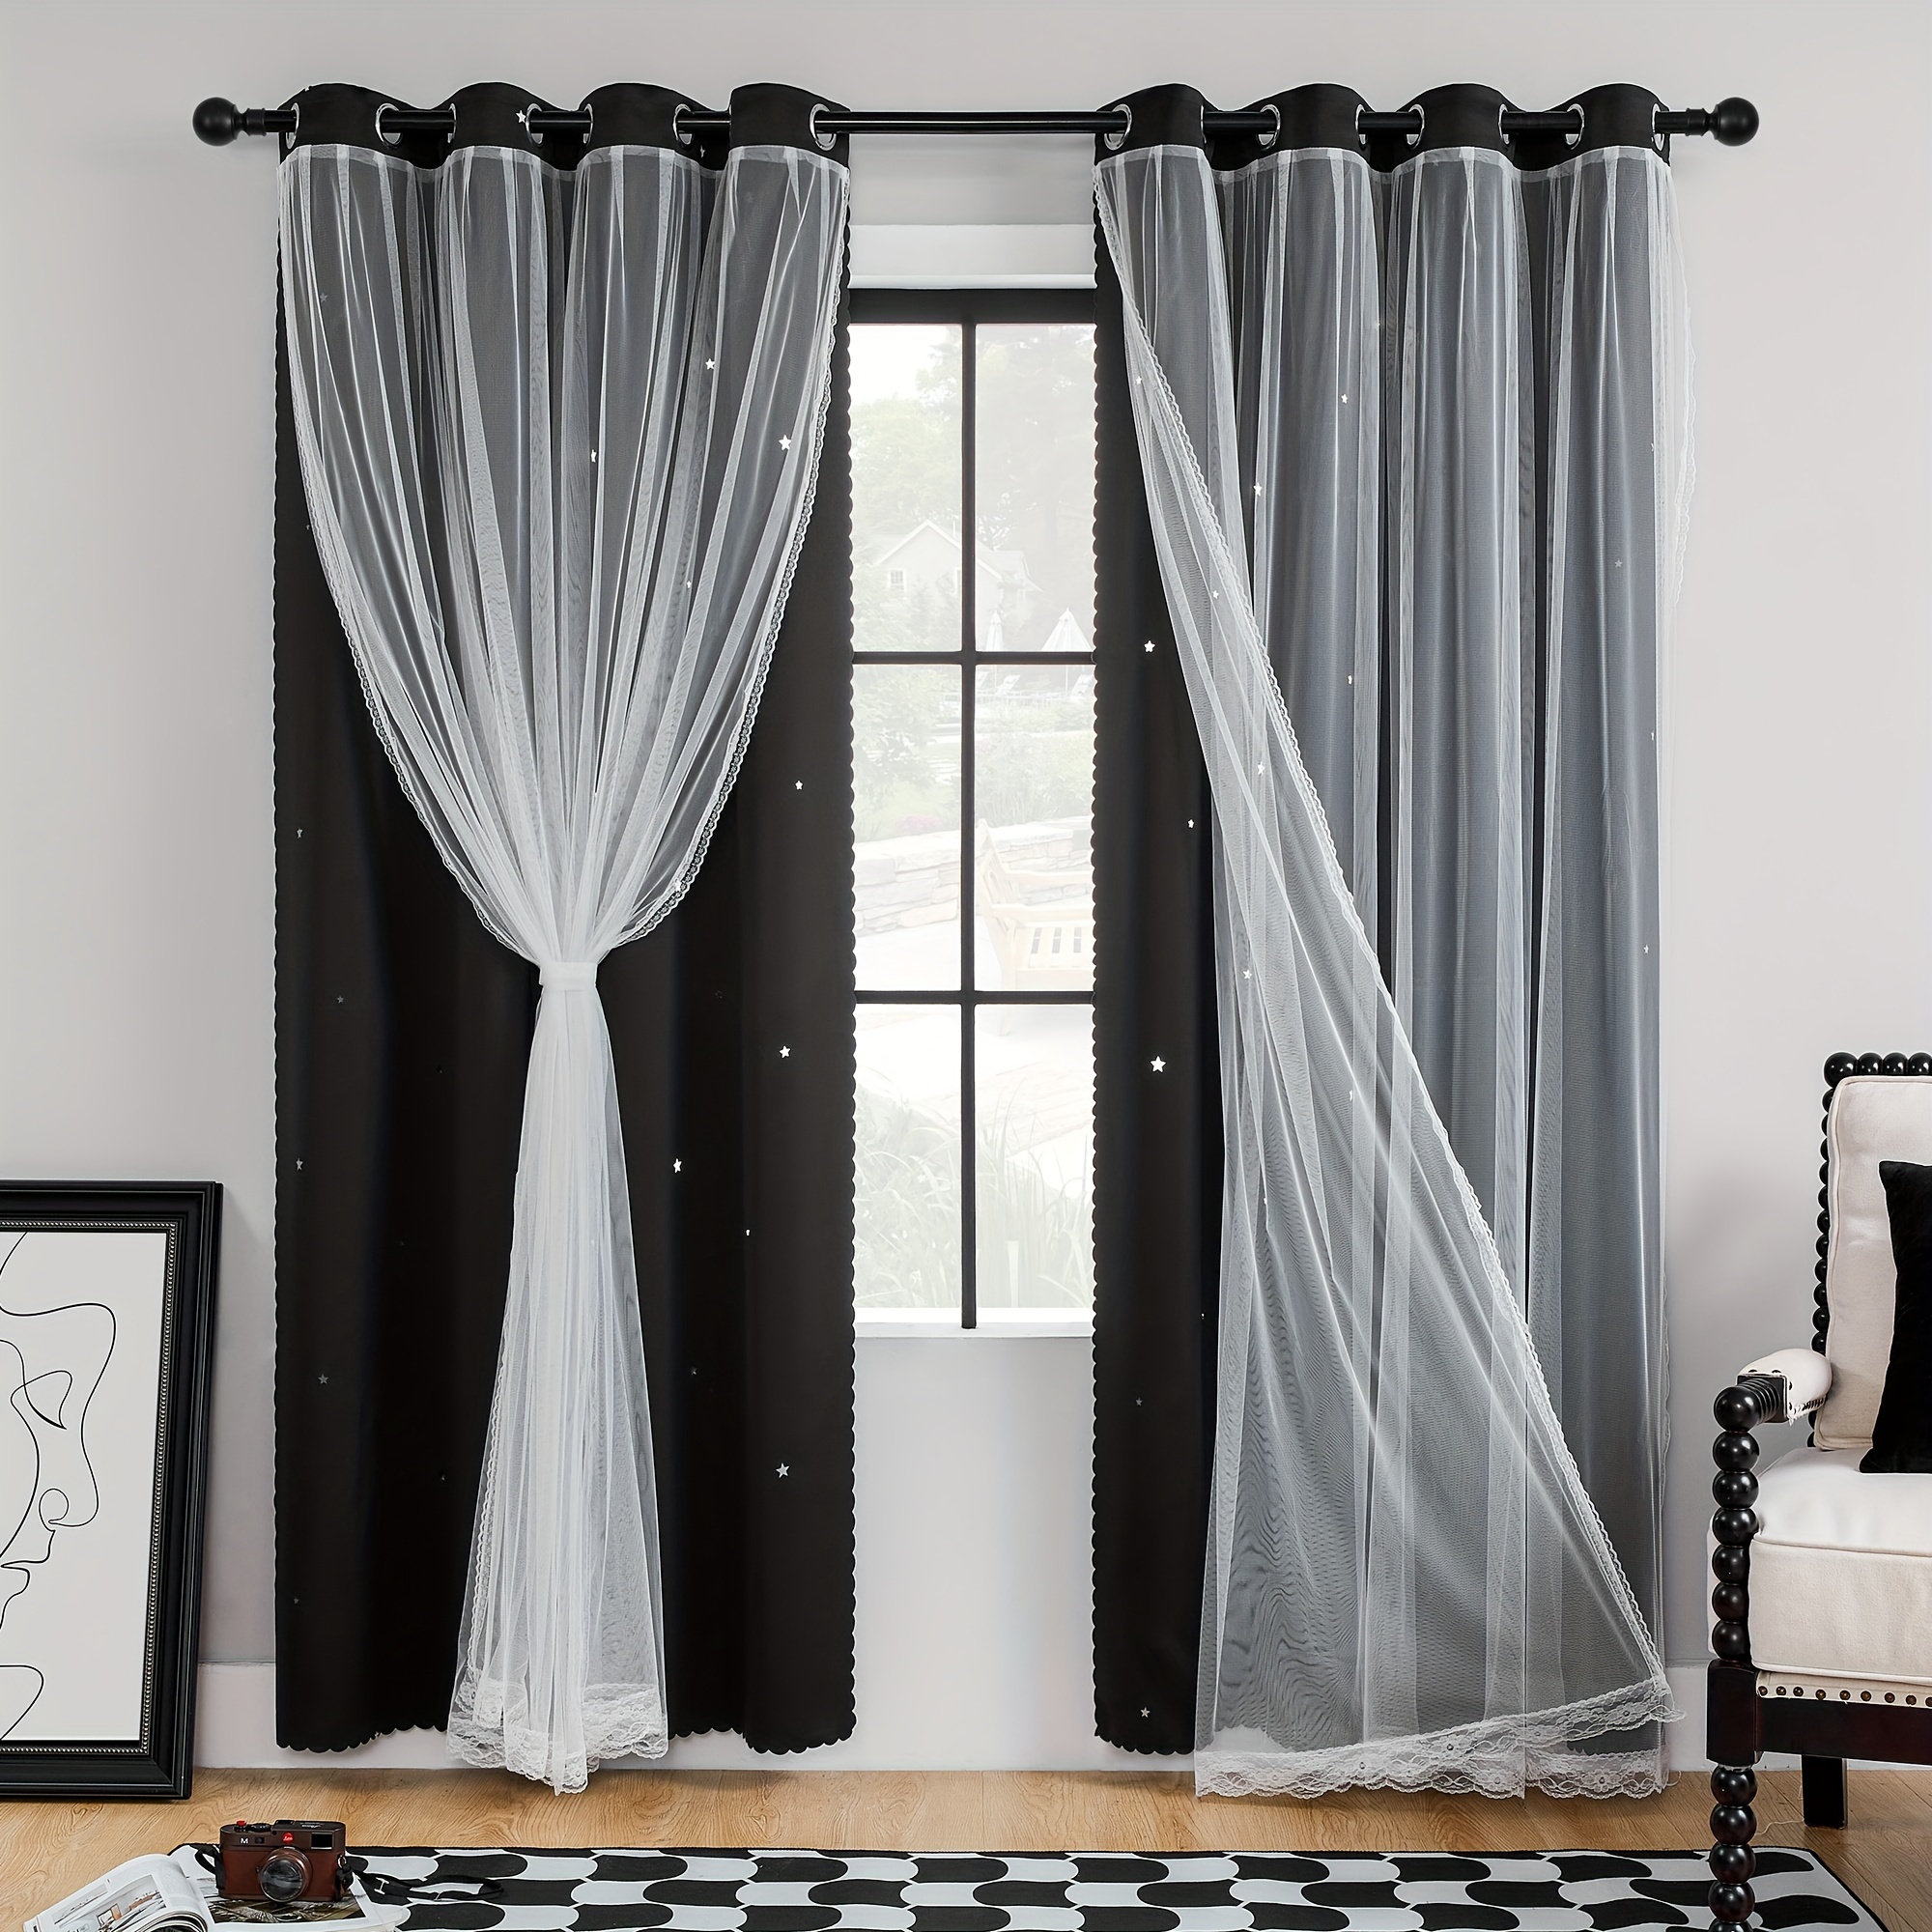 Blackout Curtains Double Layer Window Curtain,Elegant lace Embroidery Sheer  Curtain & Opaque Shading Curtain,Living Room Layered Solid Eyelet Drapes